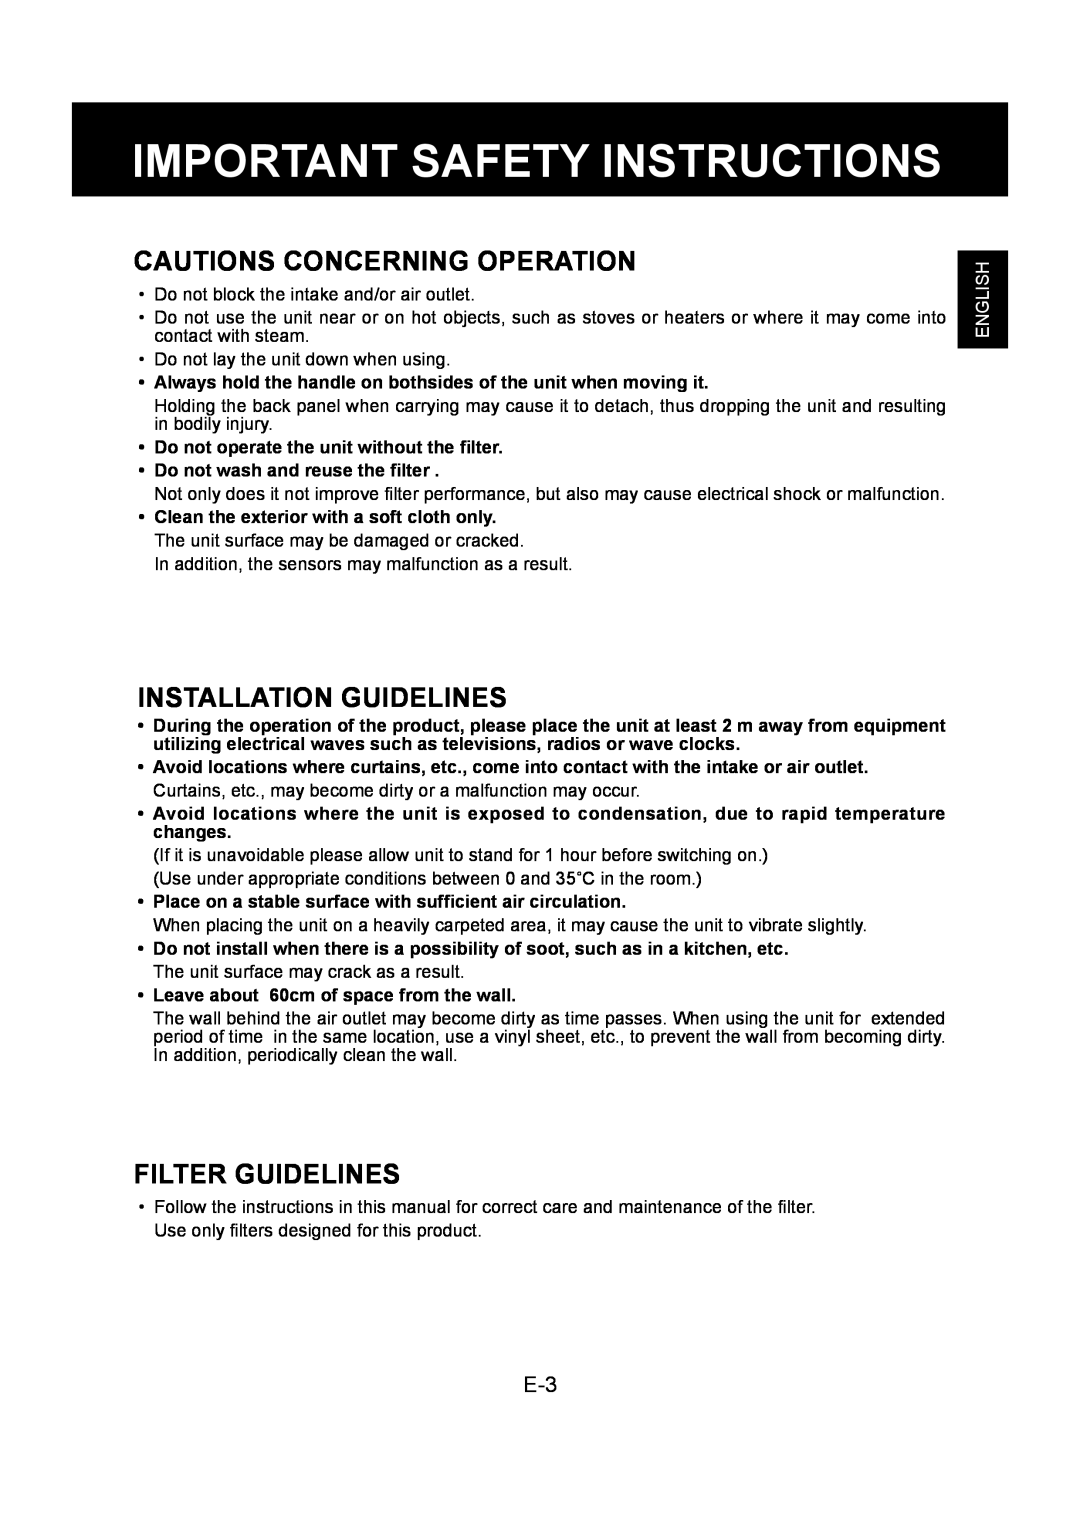 Sharp FU-Y30EU Important Safety Instructions, Cautions Concerning Operation, Installation Guidelines, Filter Guidelines 